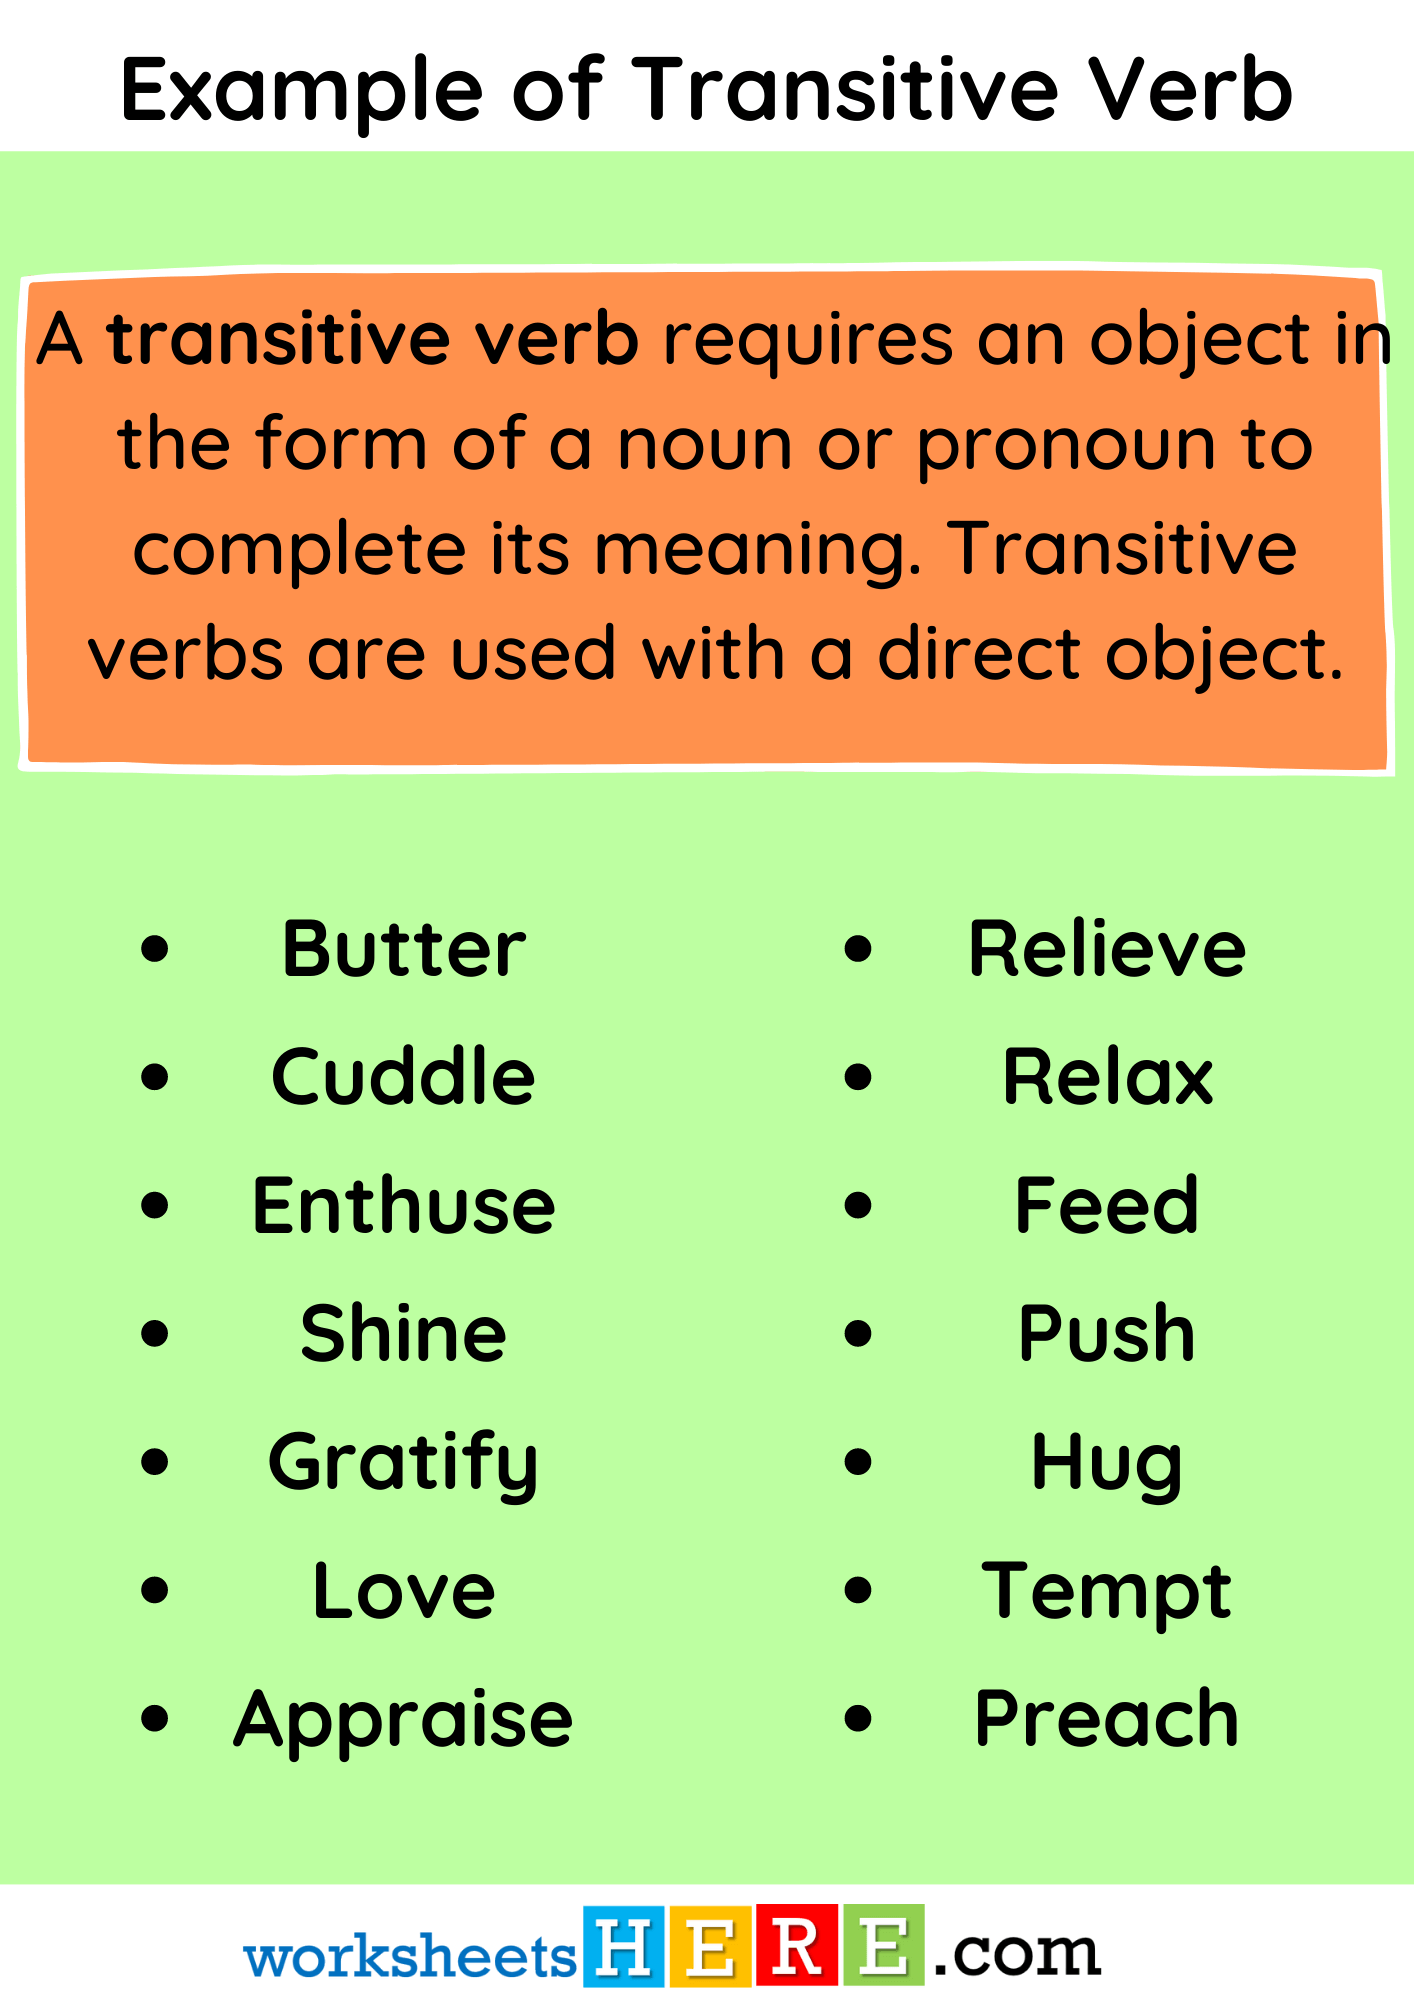 Example of Transitive Verb and Definition PDF Worksheet For Students